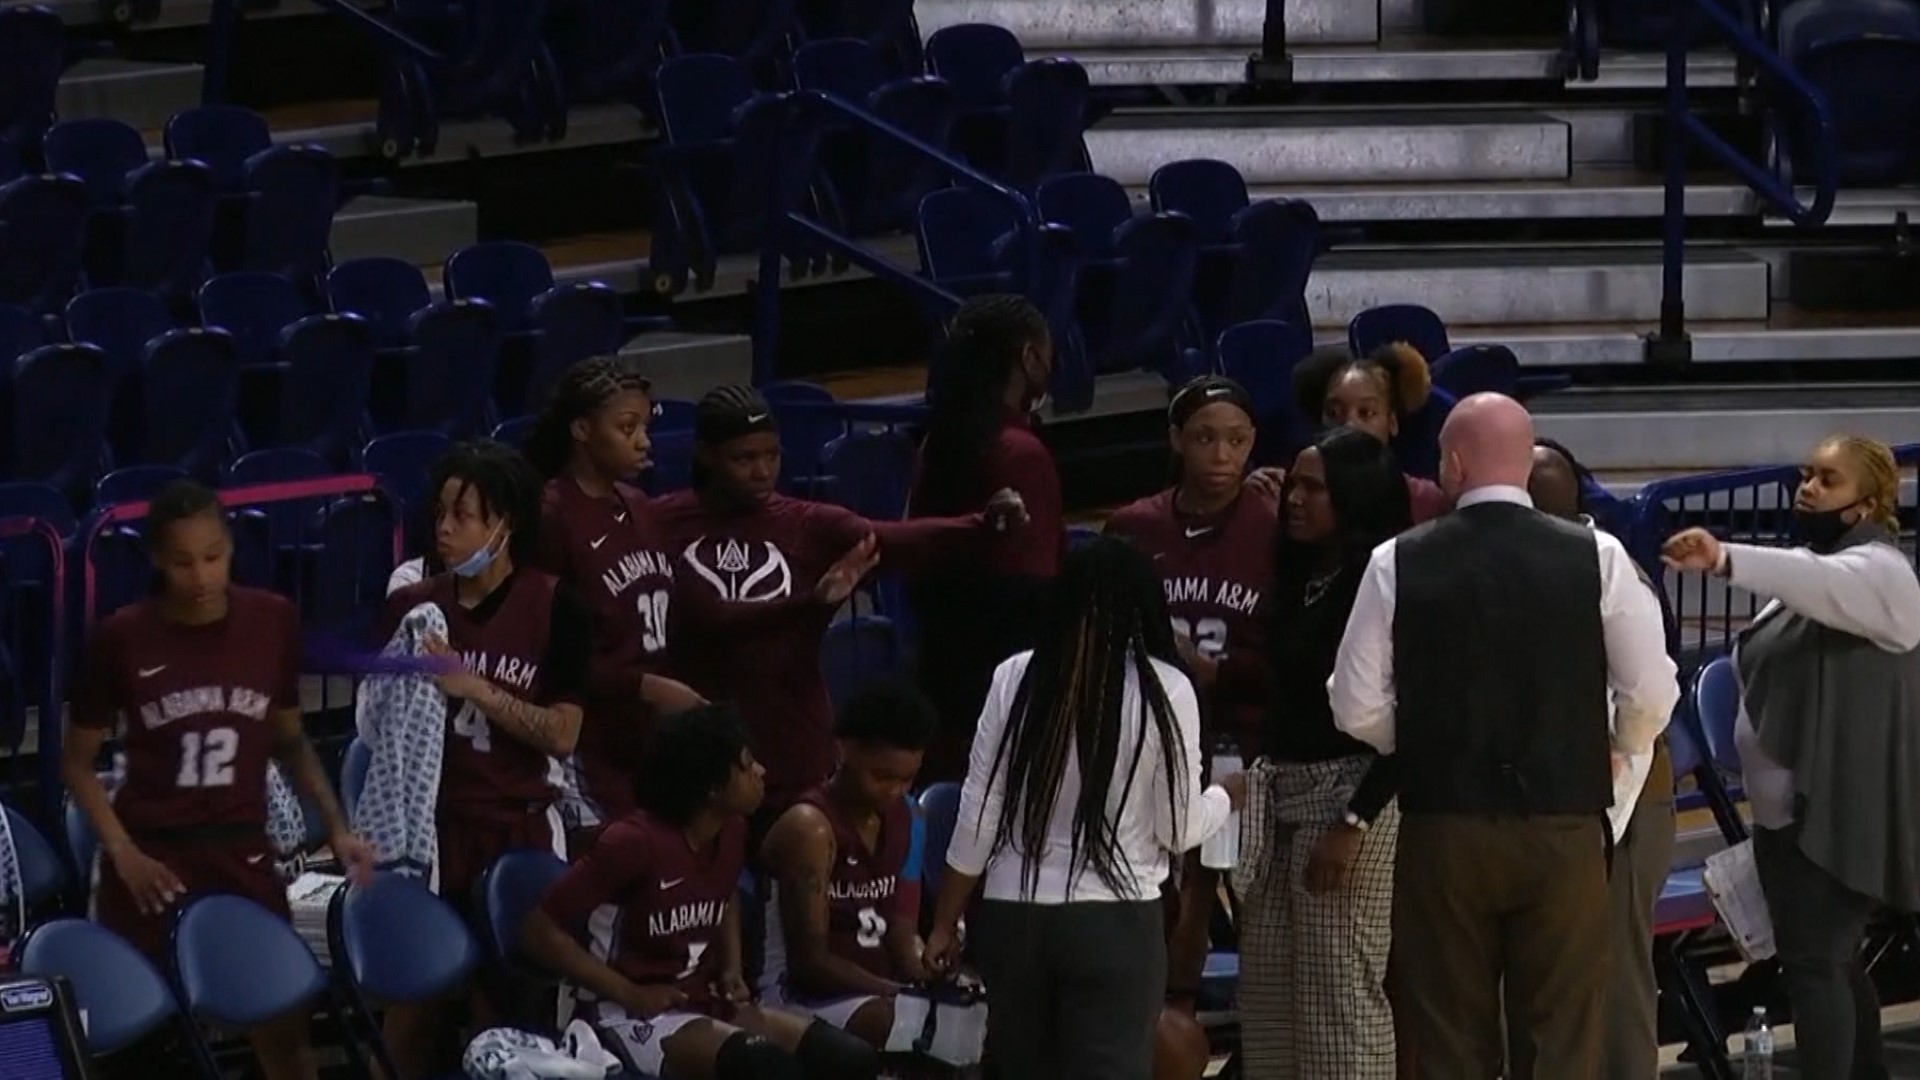 Margaret Richards and the Alabama A&M Lady Bulldogs picked up their first win of the season by defeating Samford, 72-47. NIgeria Jones led the the way with 28 points